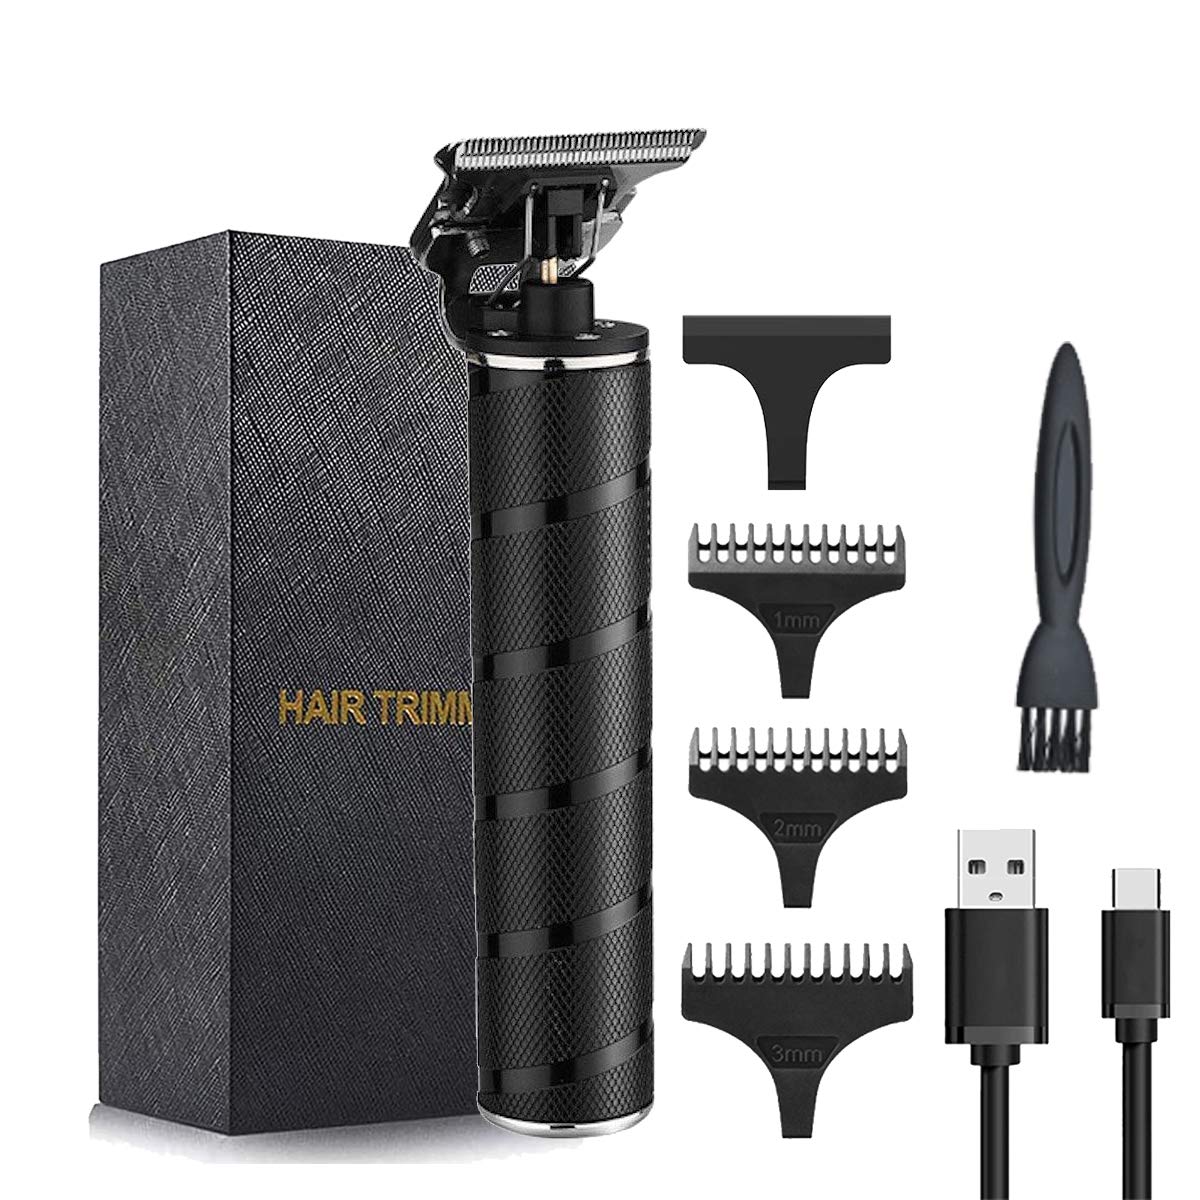 GOMINYUF USB Rechargeable Professional Hair Clipper,Hair Trimmer for Men,Gominyouf Cordless Beard Shaver Precision Trimmer with Metal Waterproof Body (Black)